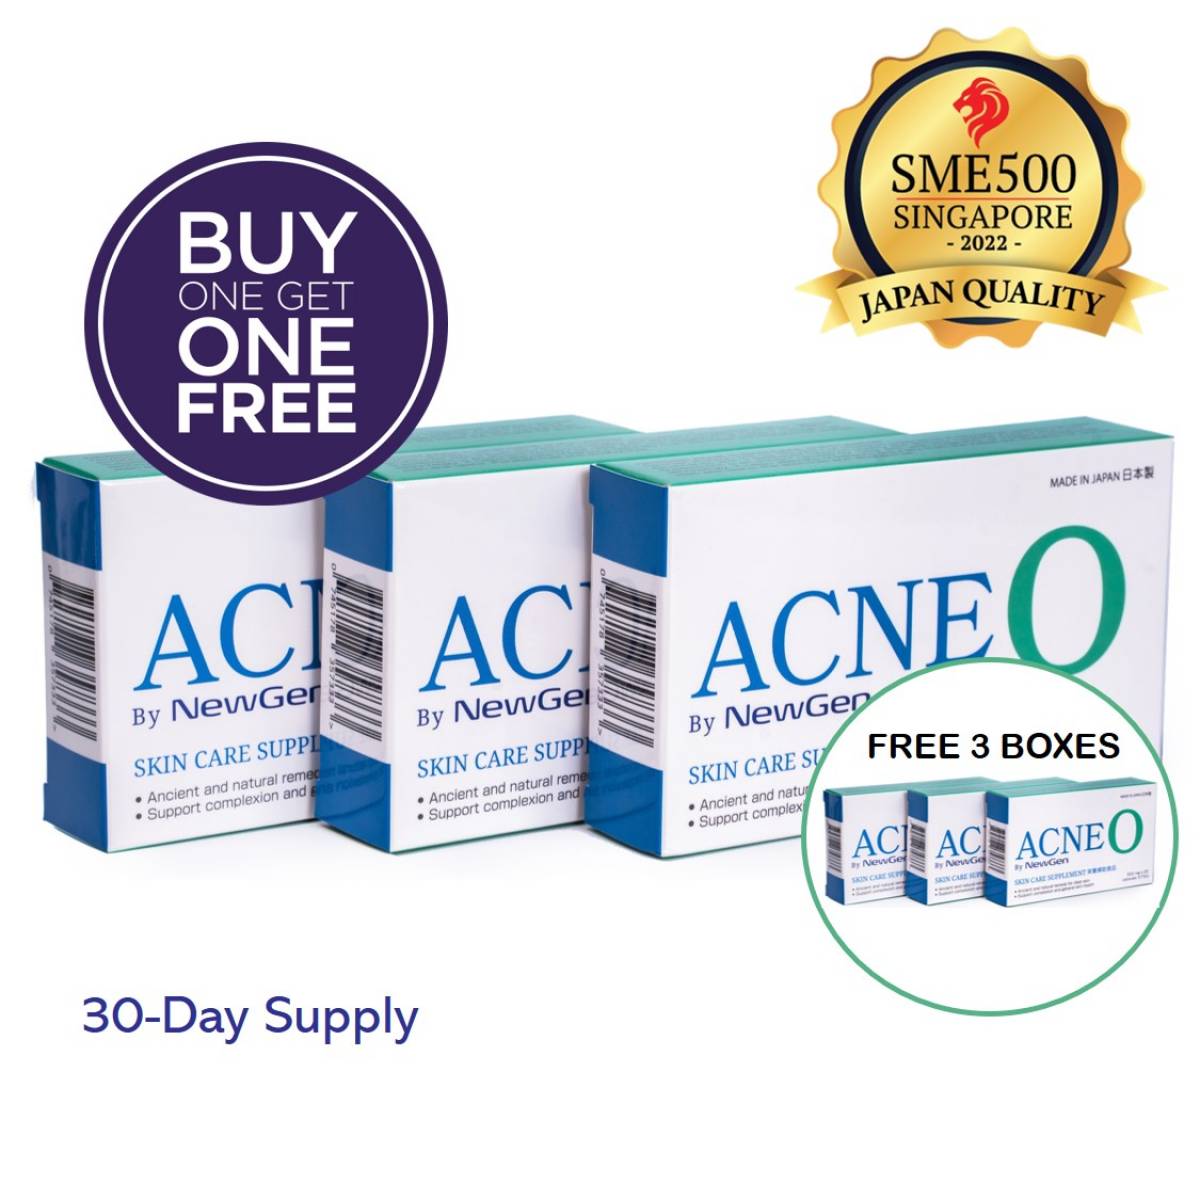 ACNE O Skin Care Supplement (Bundle of 3) [Buy1Get1Free]